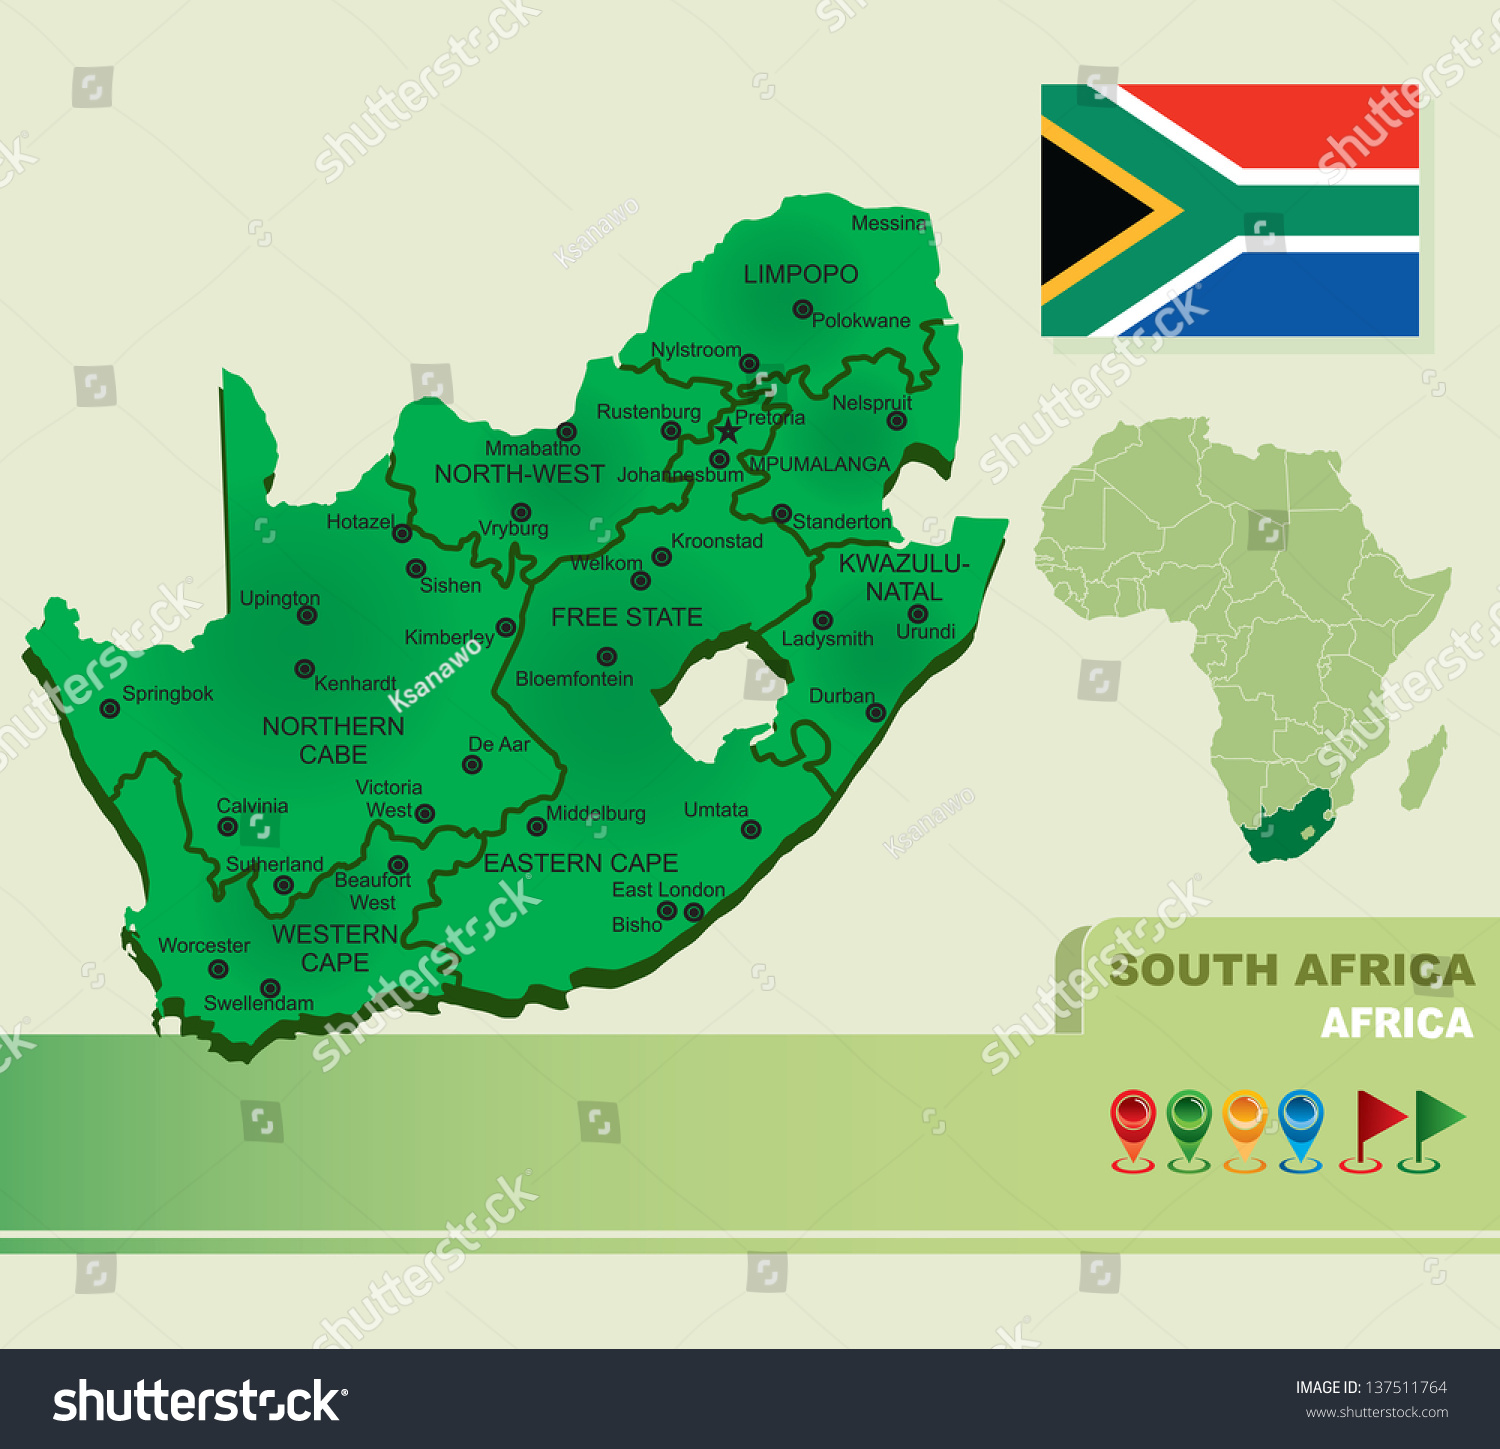 South Africa Vector Map And Flag 137511764 Shutterstock 9992